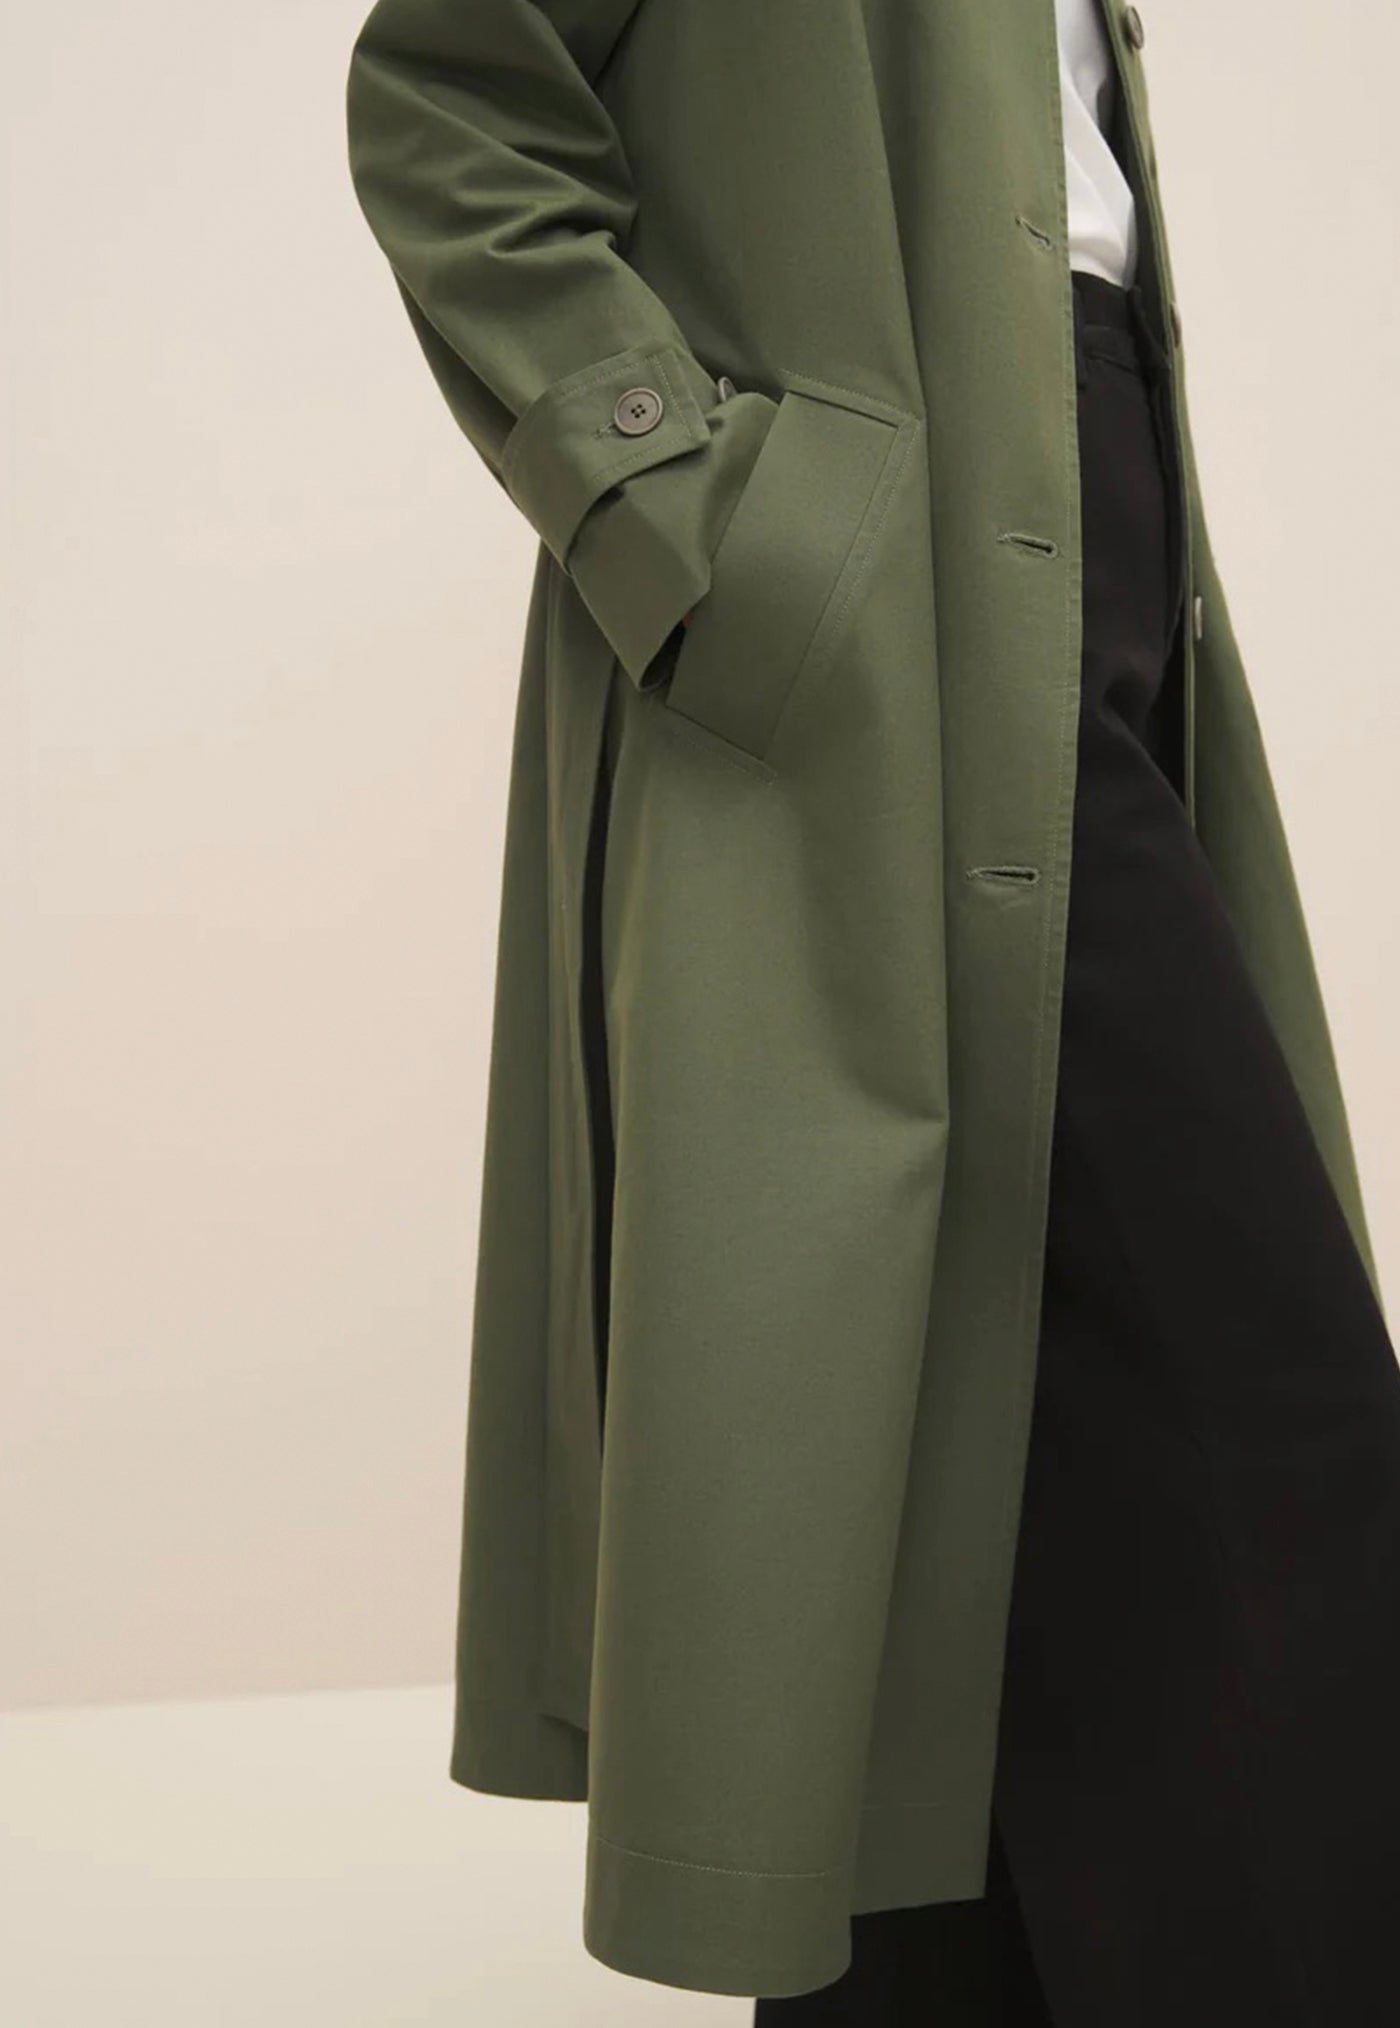 Cleo Trench Coat - Sage sold by Angel Divine